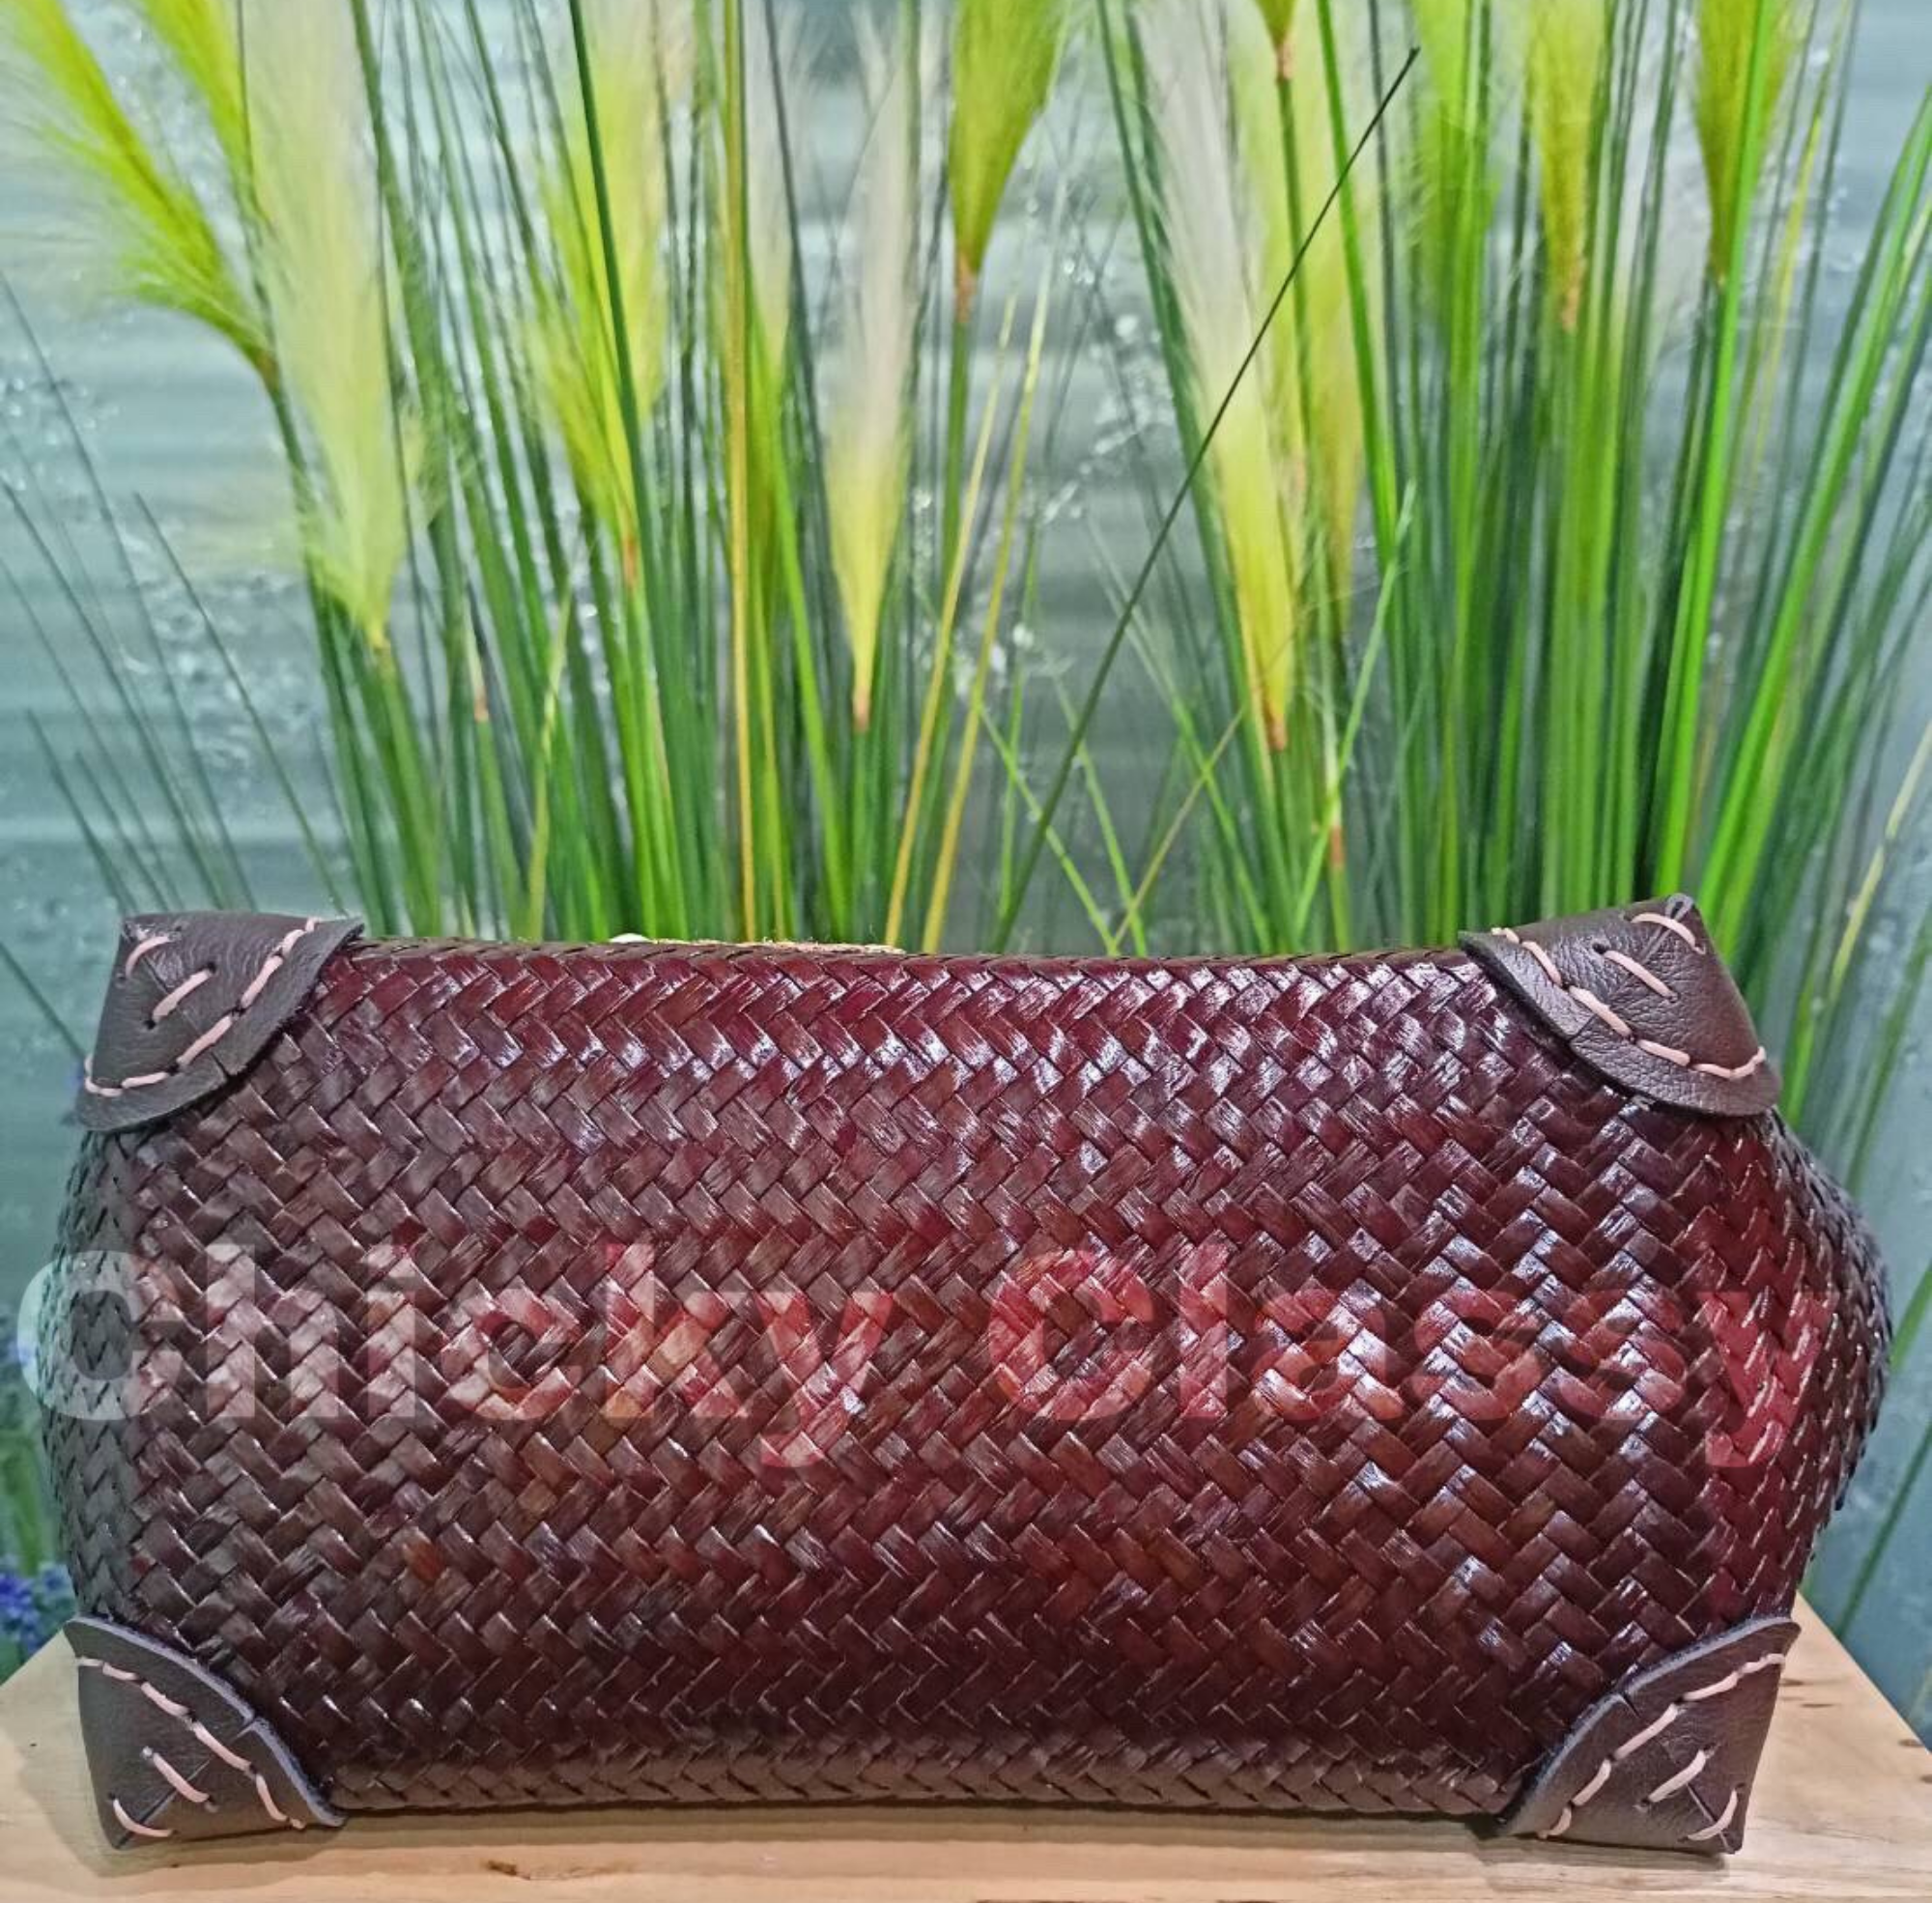 Chicky Classy Home made special date Bag